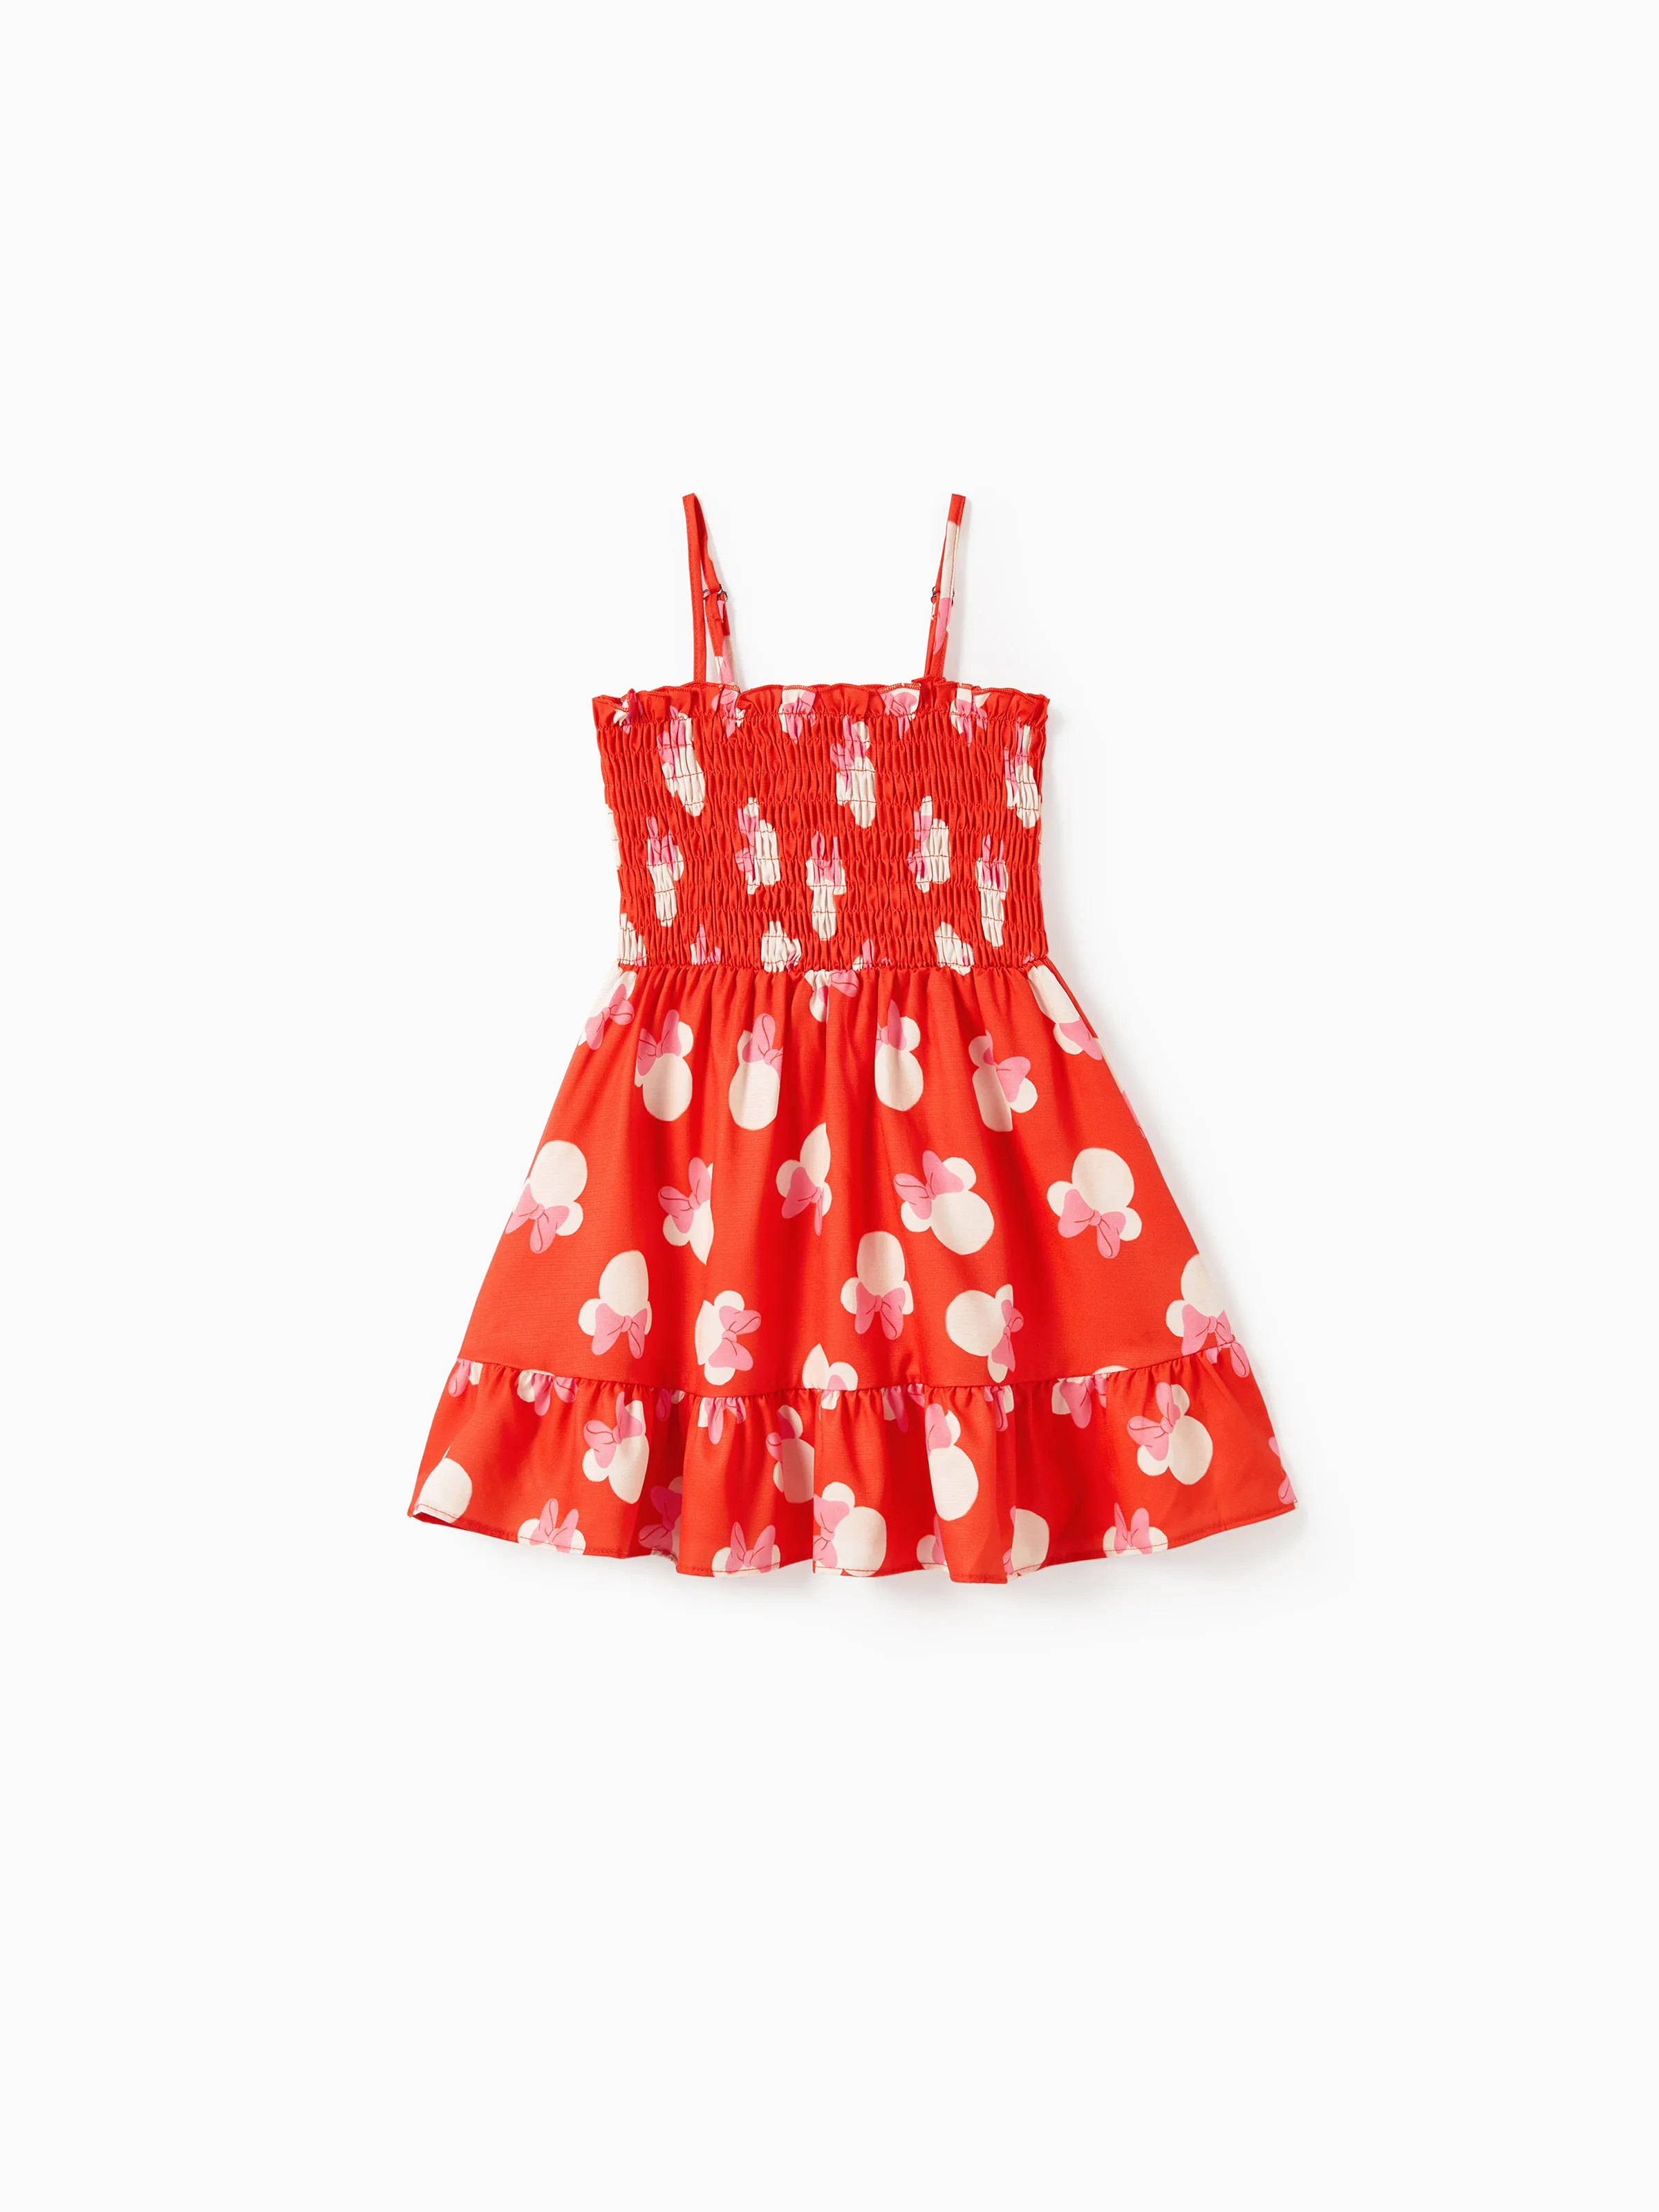 

Disney Mickey and Friends Mommy and Me Minnie All-over Print Sleeveless Dress/Romper